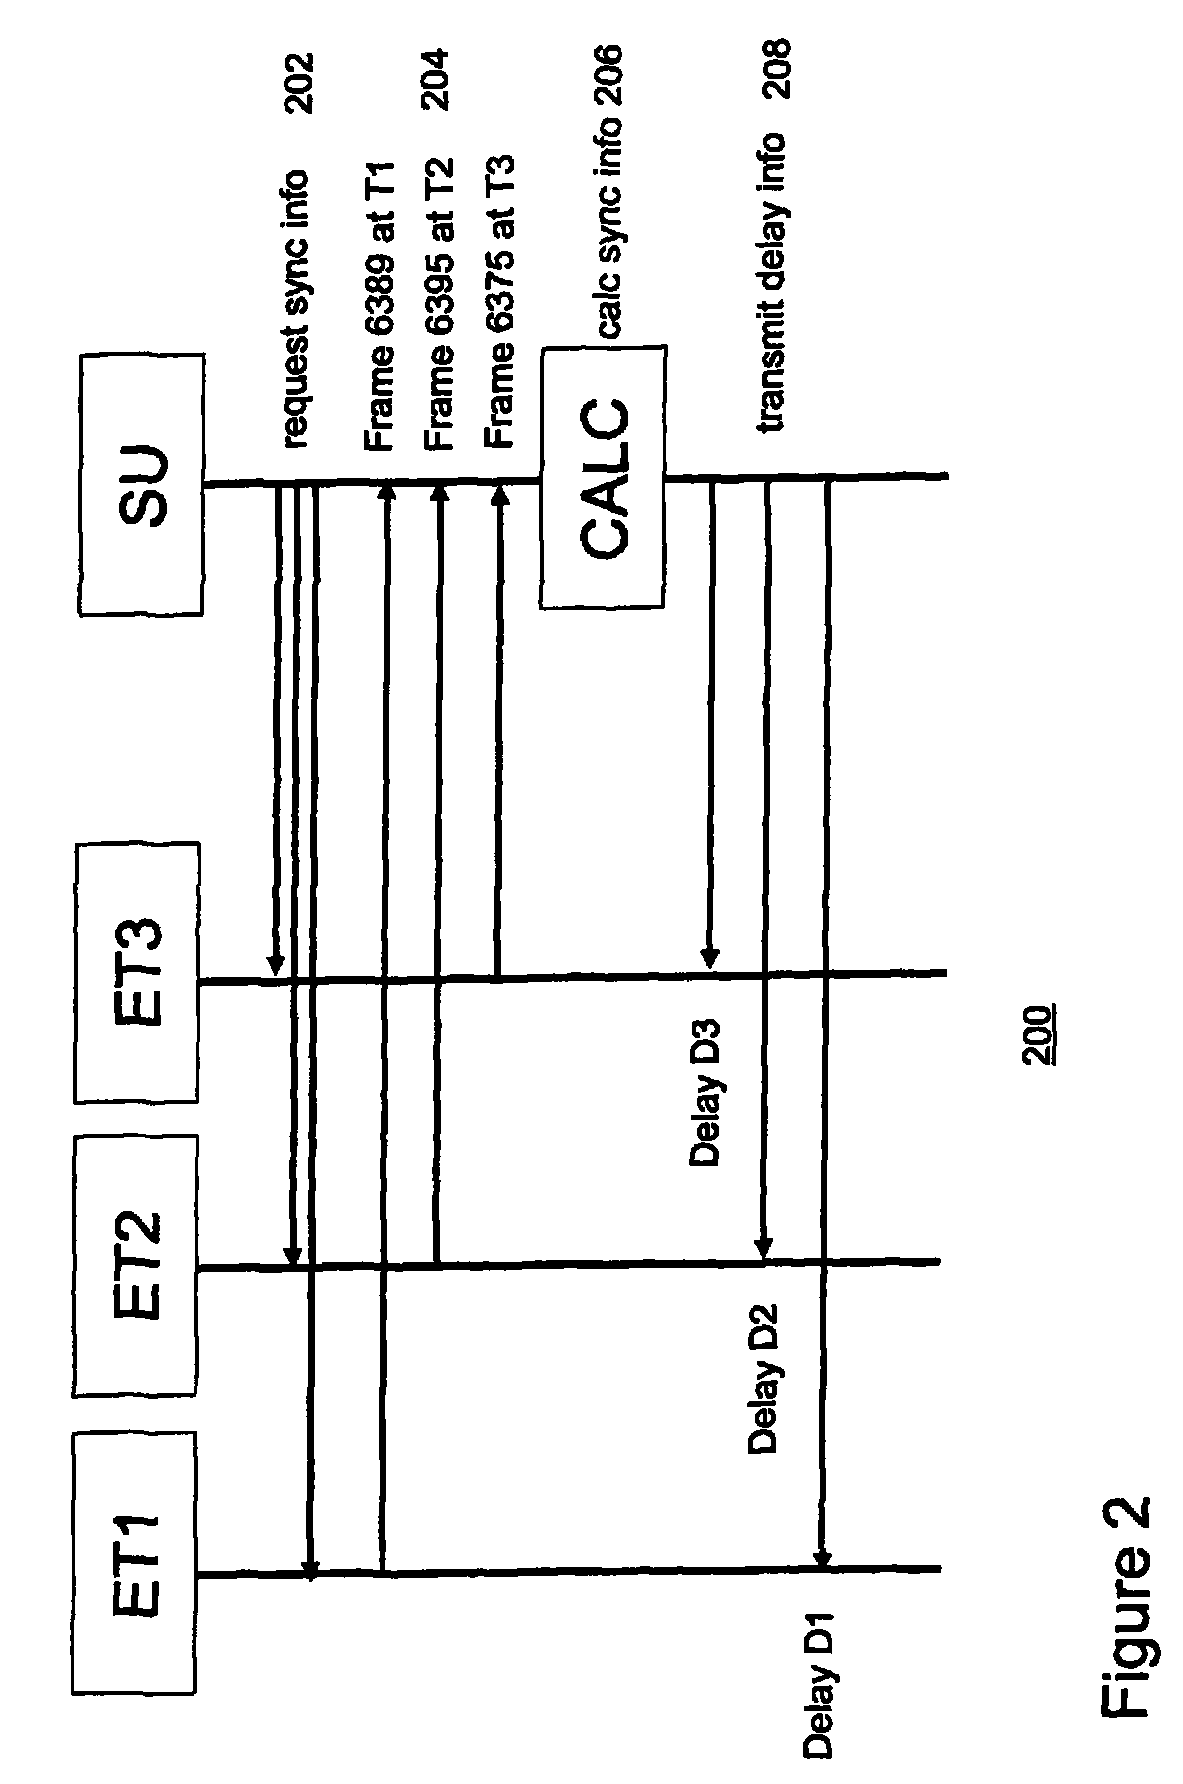 Method and system for synchronizing the output of terminals